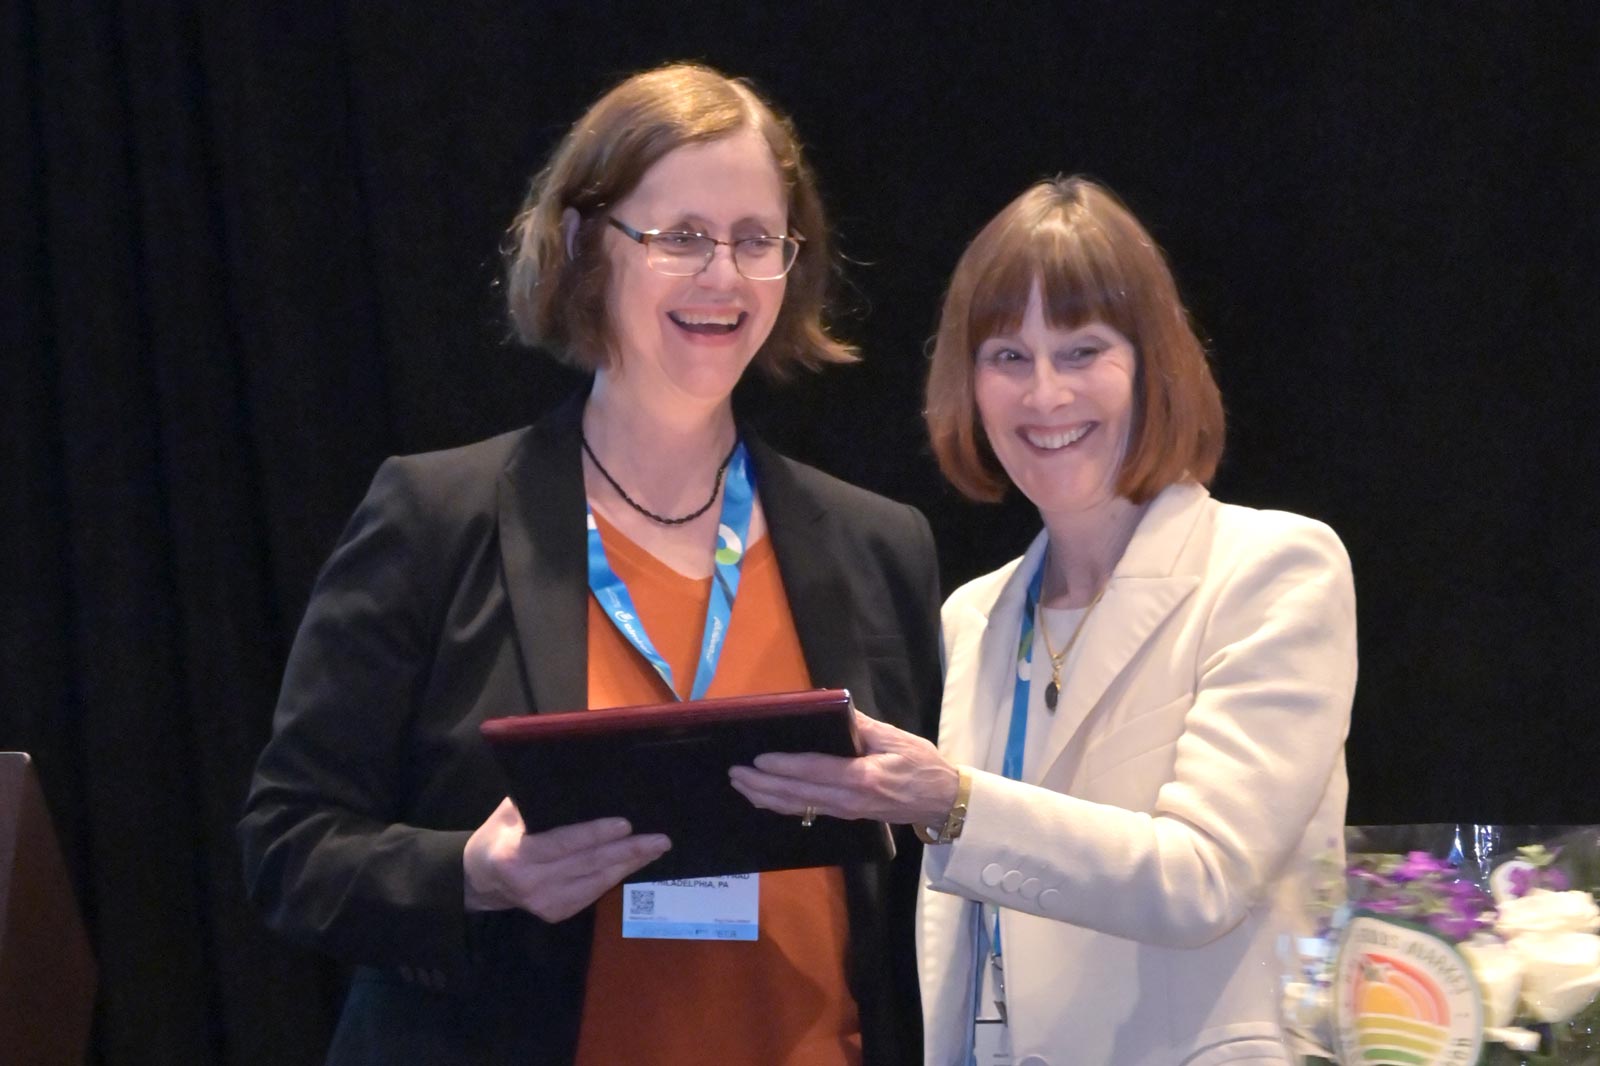 DF President Dr. Janet Fairley presents the Practitioner of the Year Award to Dr. Victoria Werth.